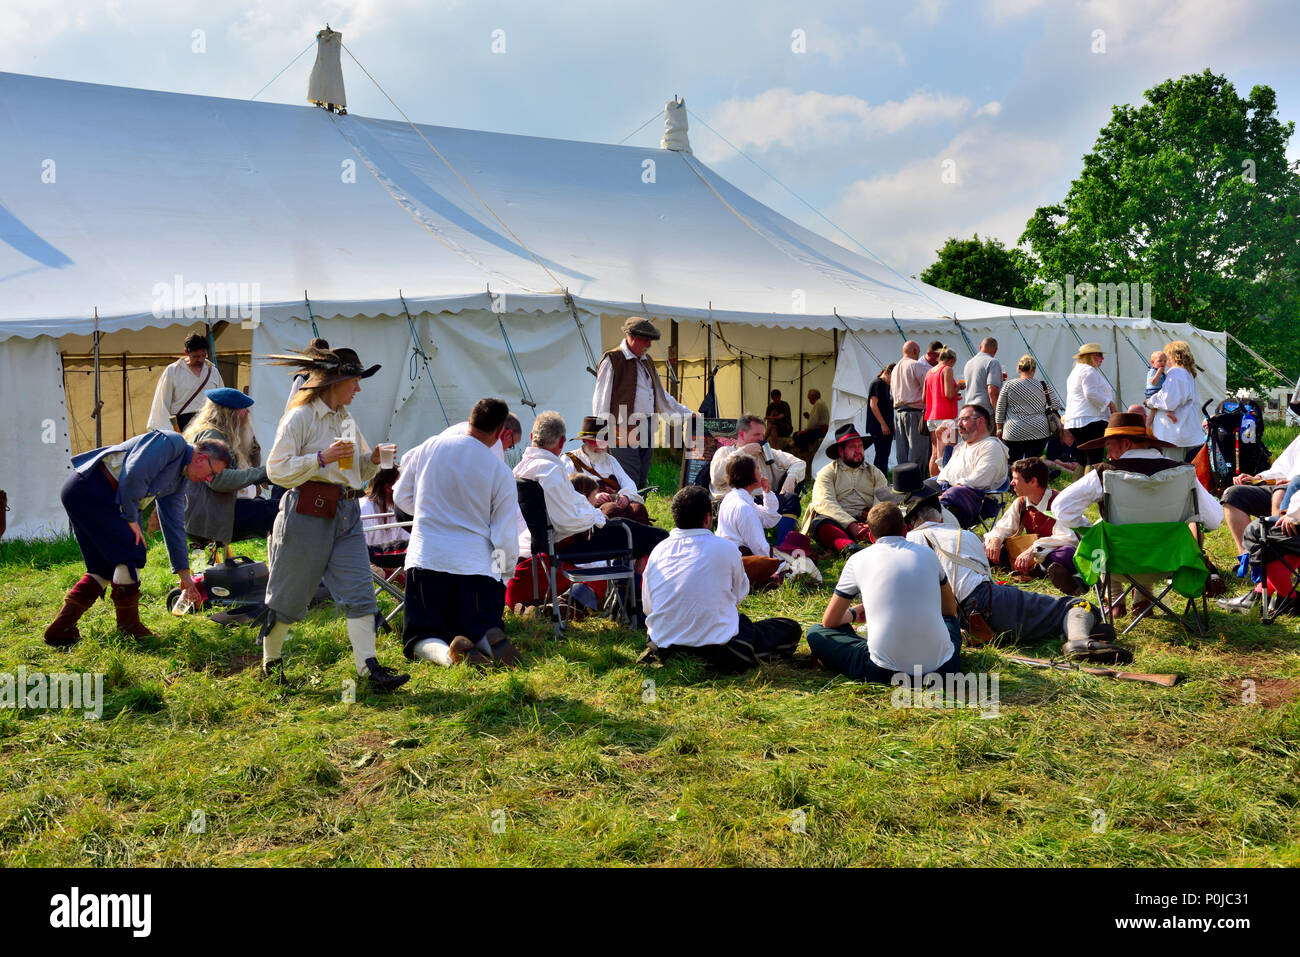 Participants relaxing sitting on grass outside large canvas catering marquee at festival Stock Photo